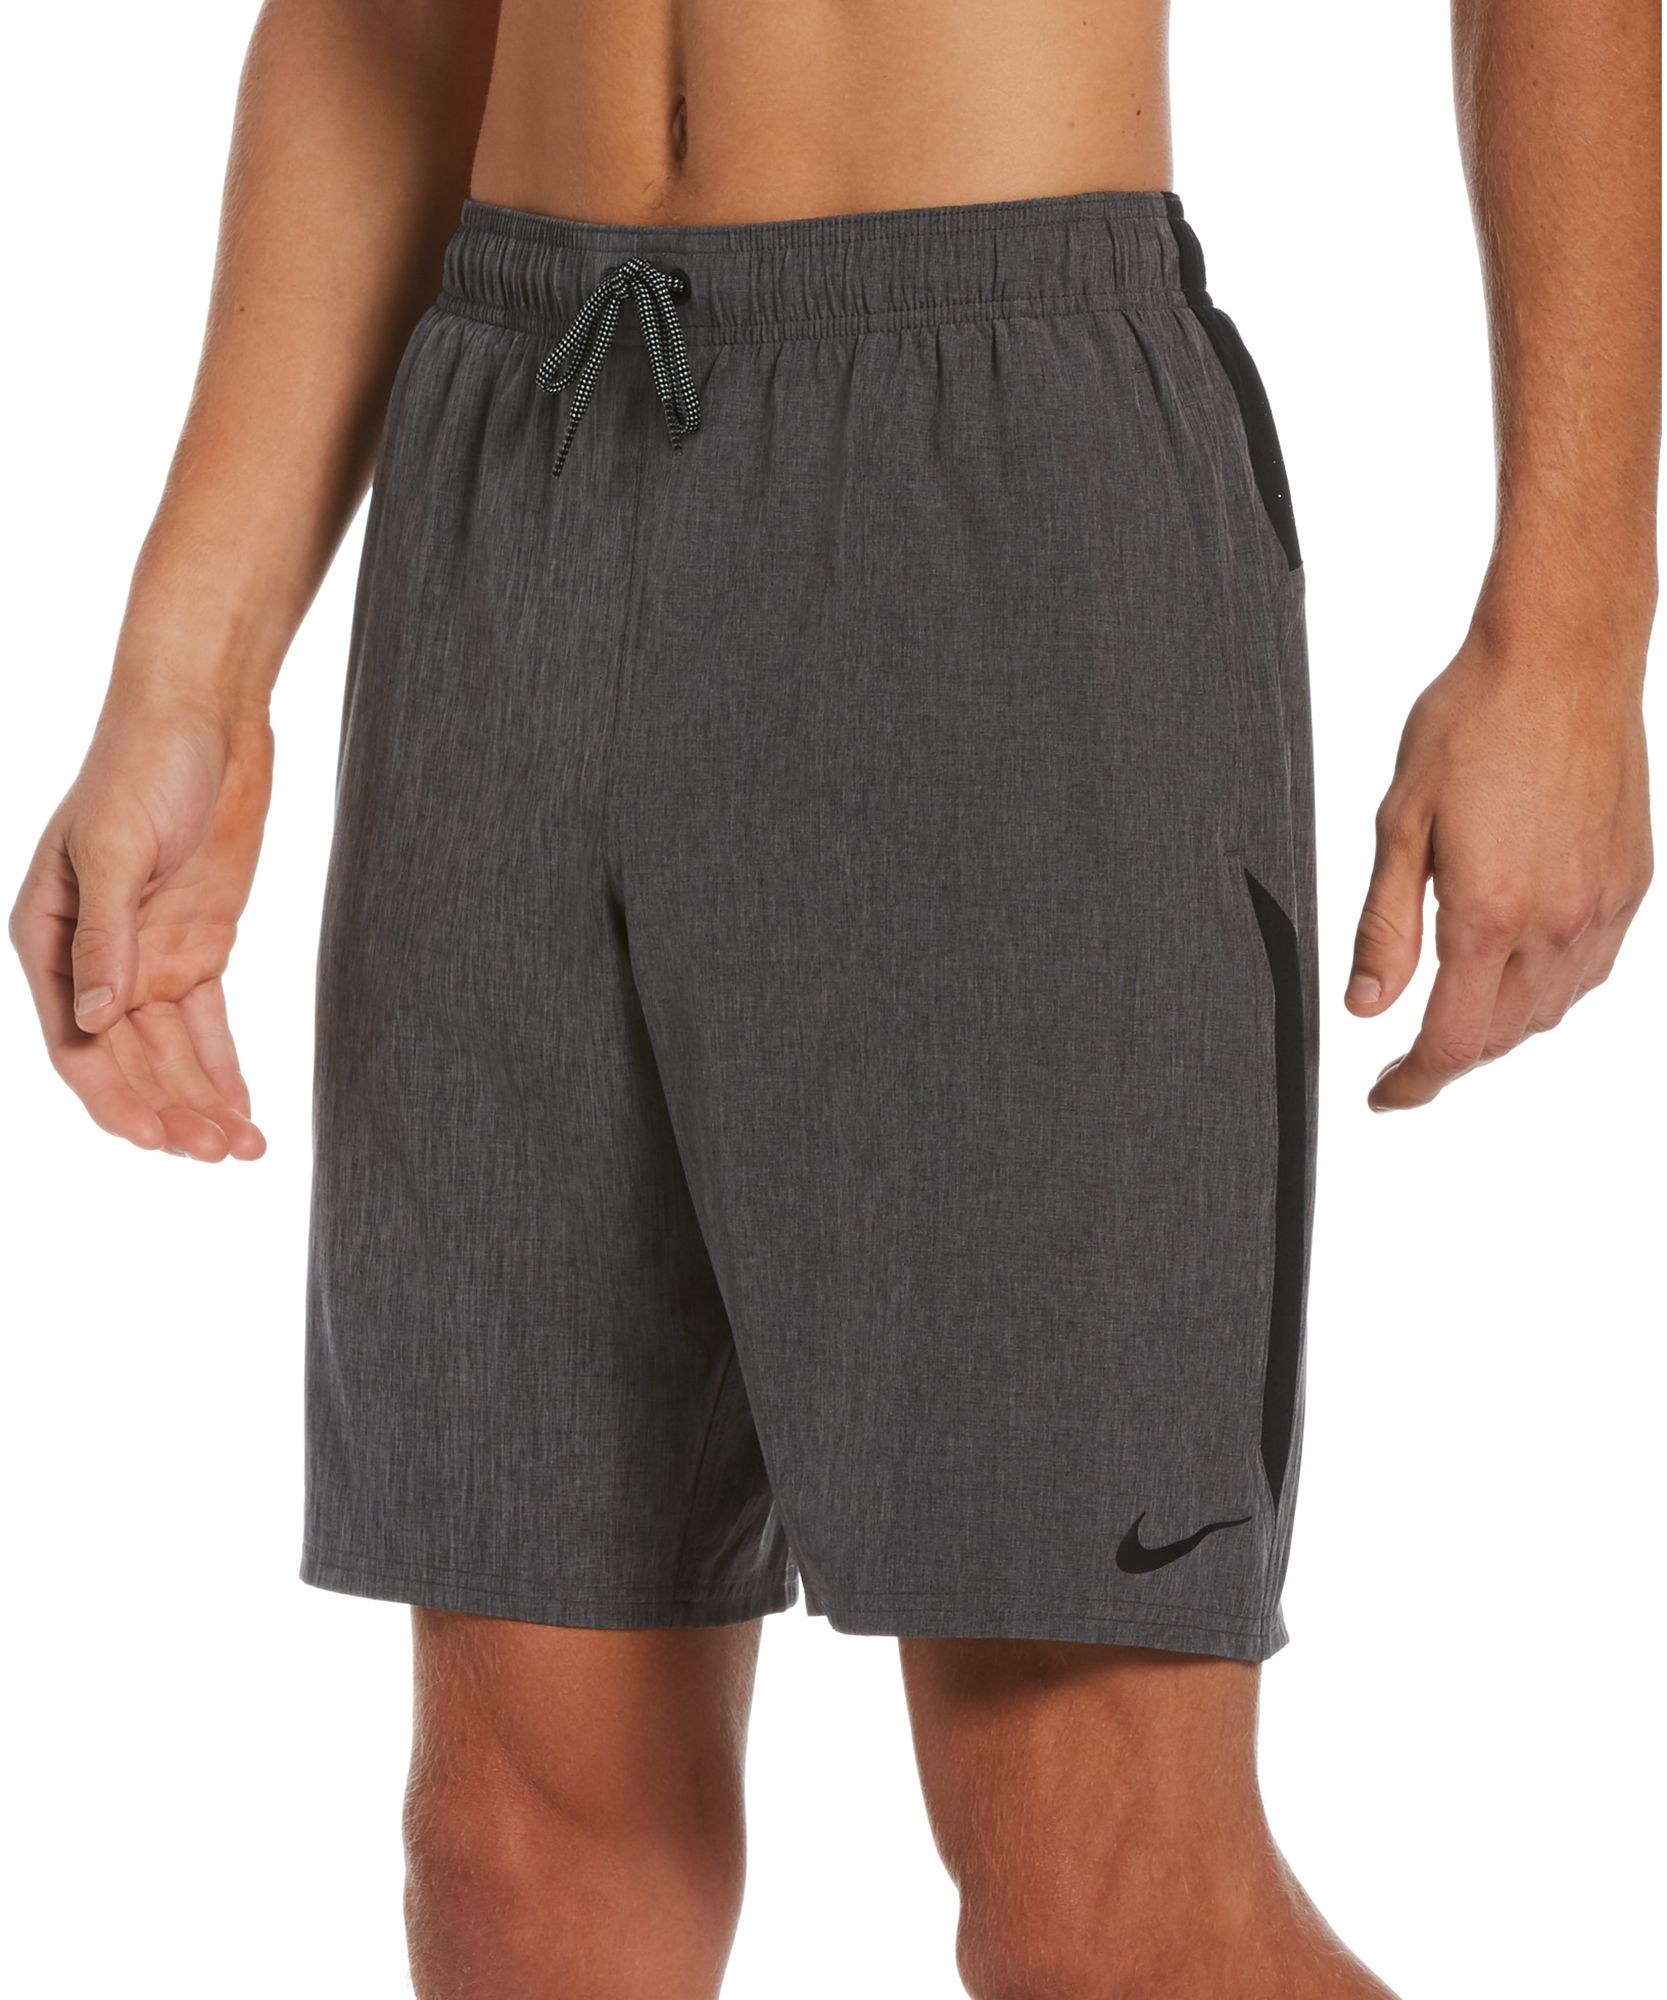 Nike Mens Contend Volley Swim Trunks